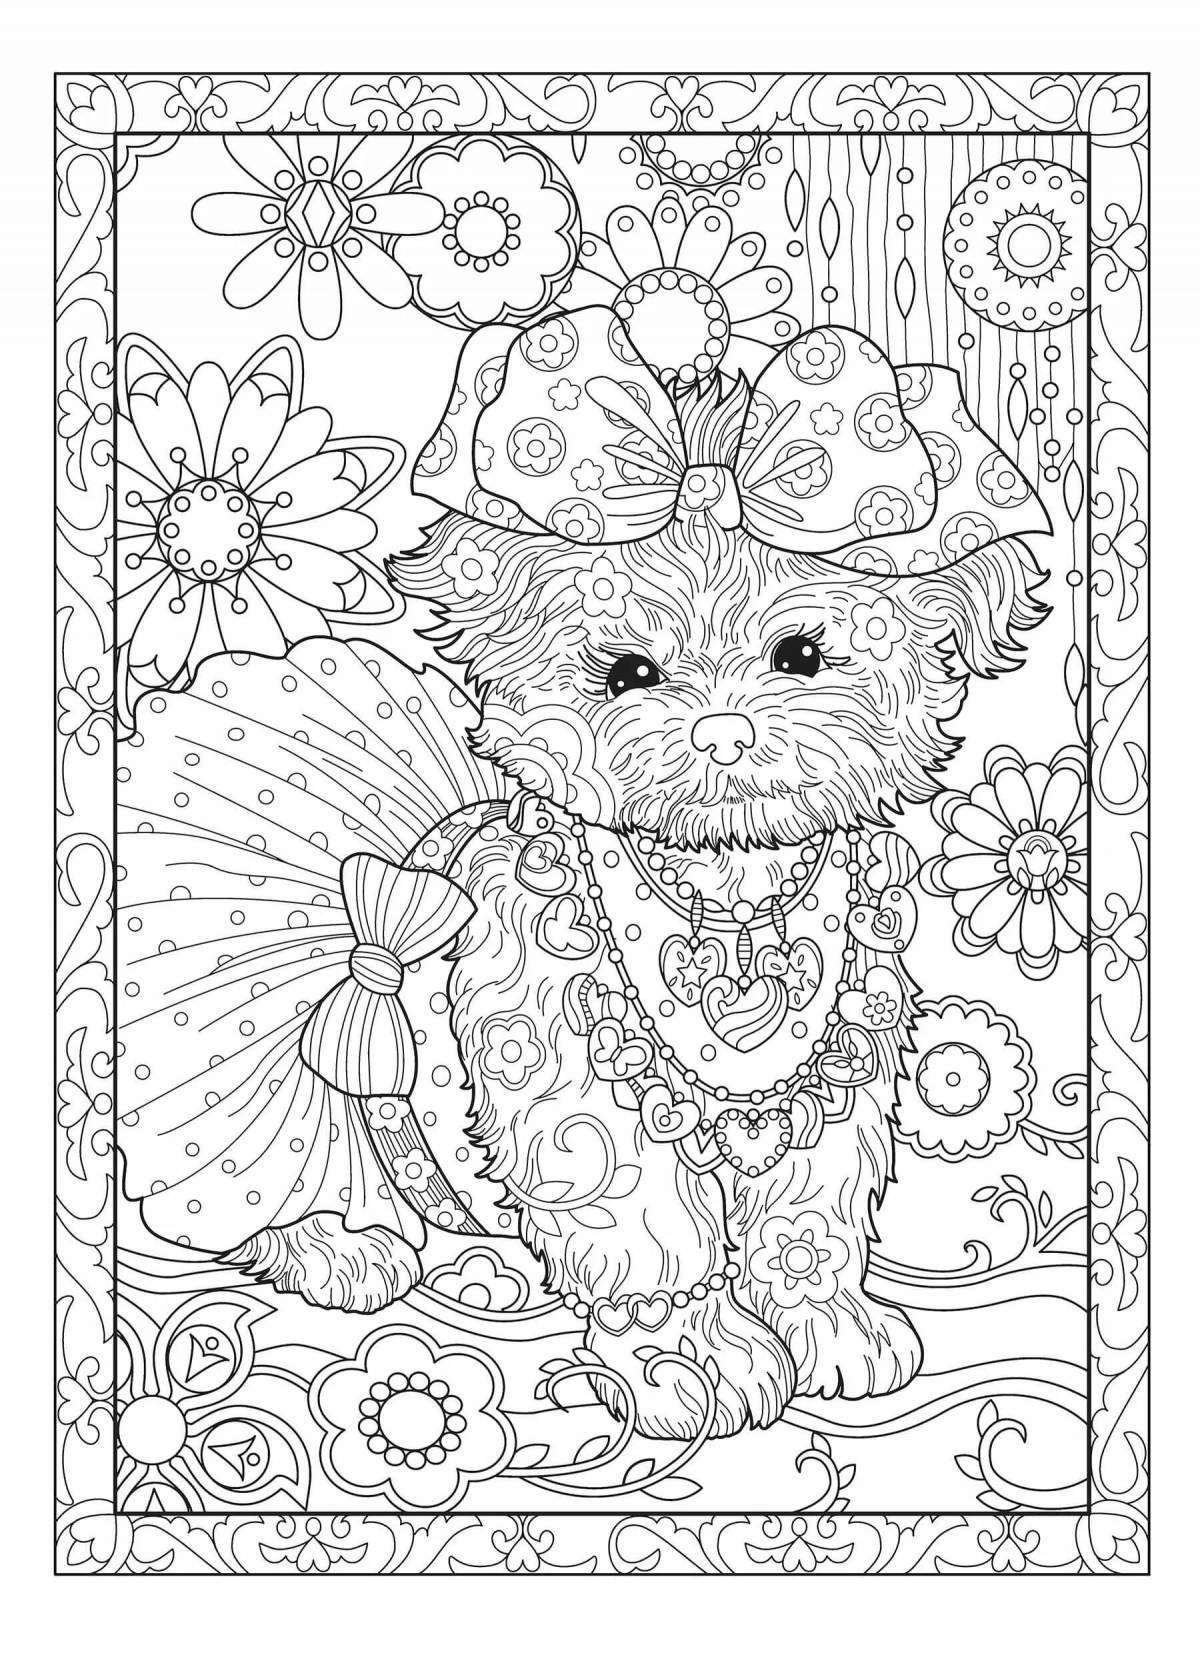 Refreshing anti-stress coloring book for girls animals